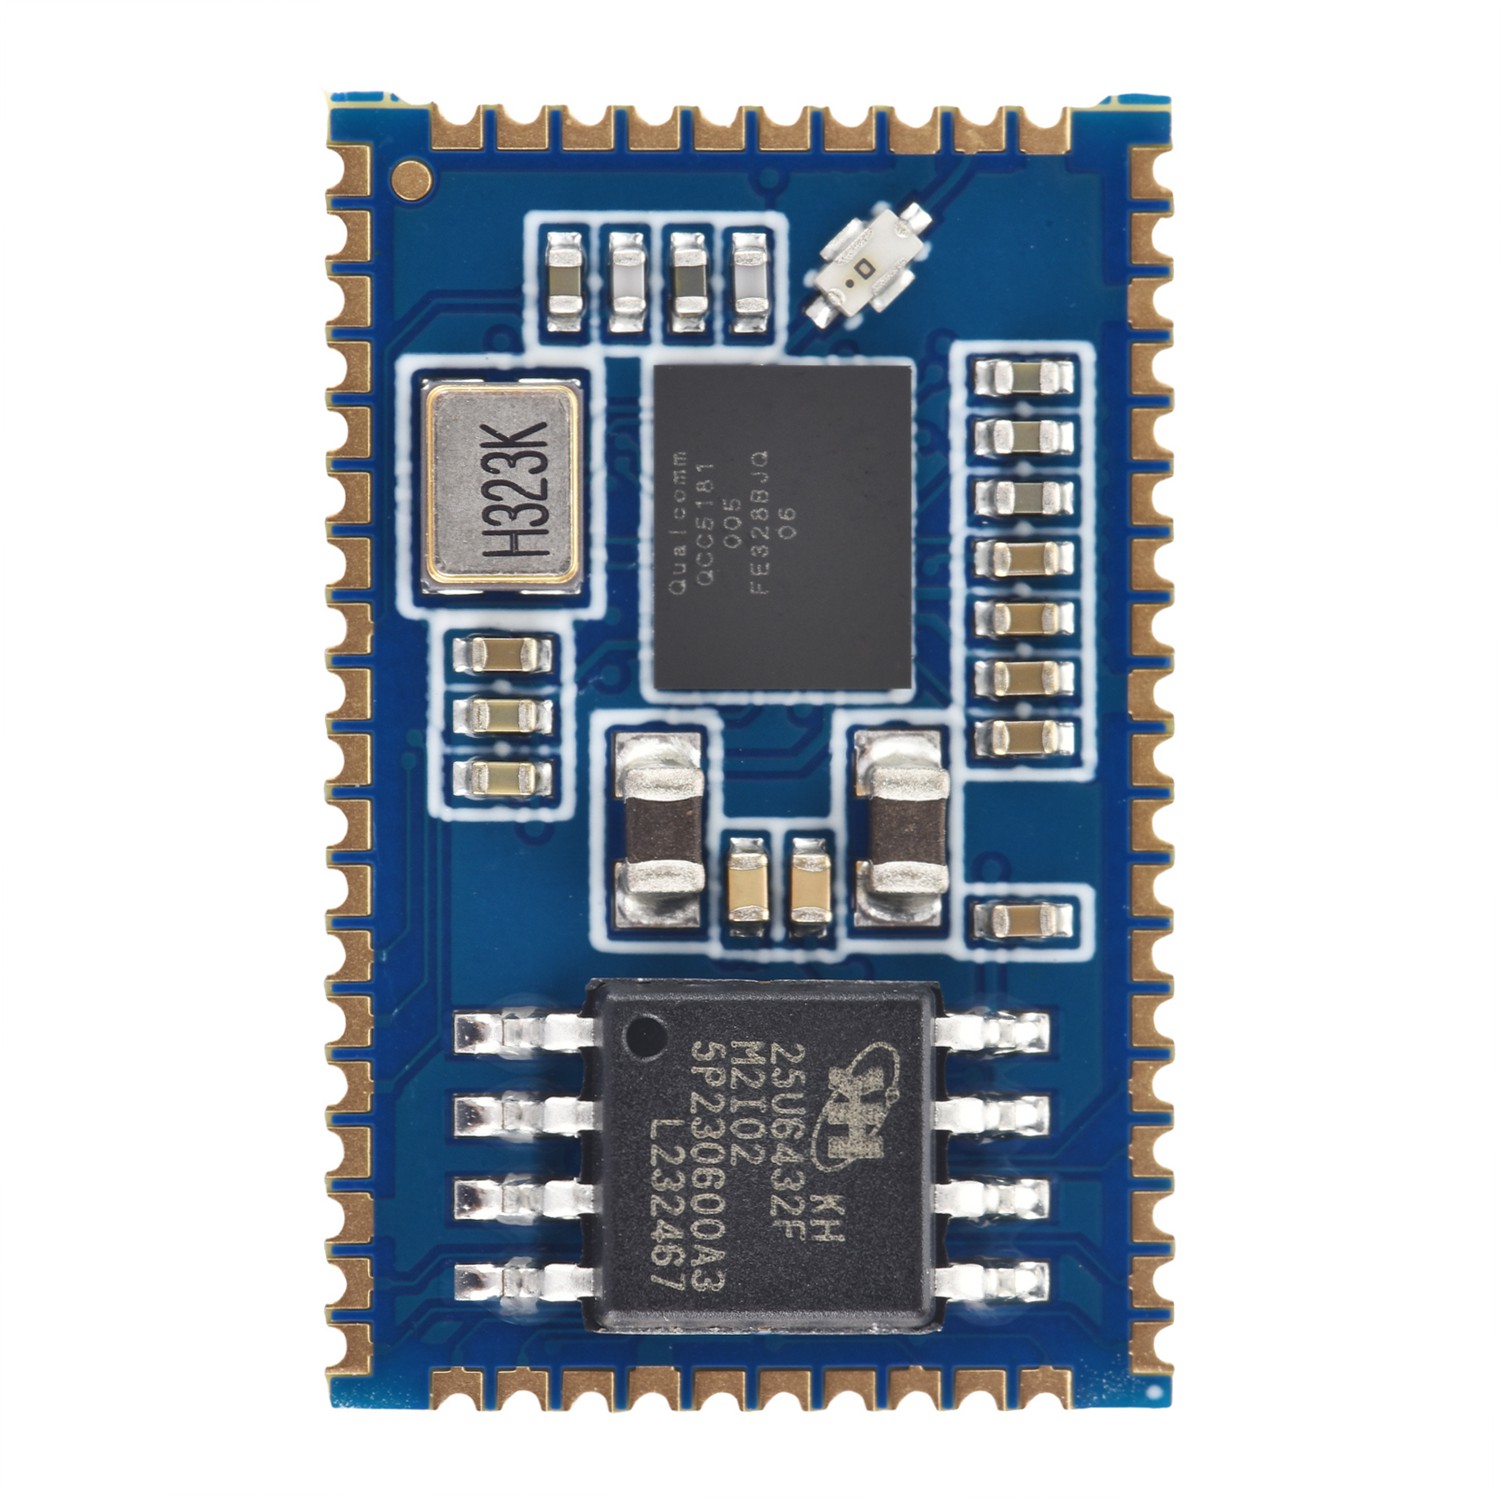 Introduction to BTM581 (QCC5181) Bluetooth module